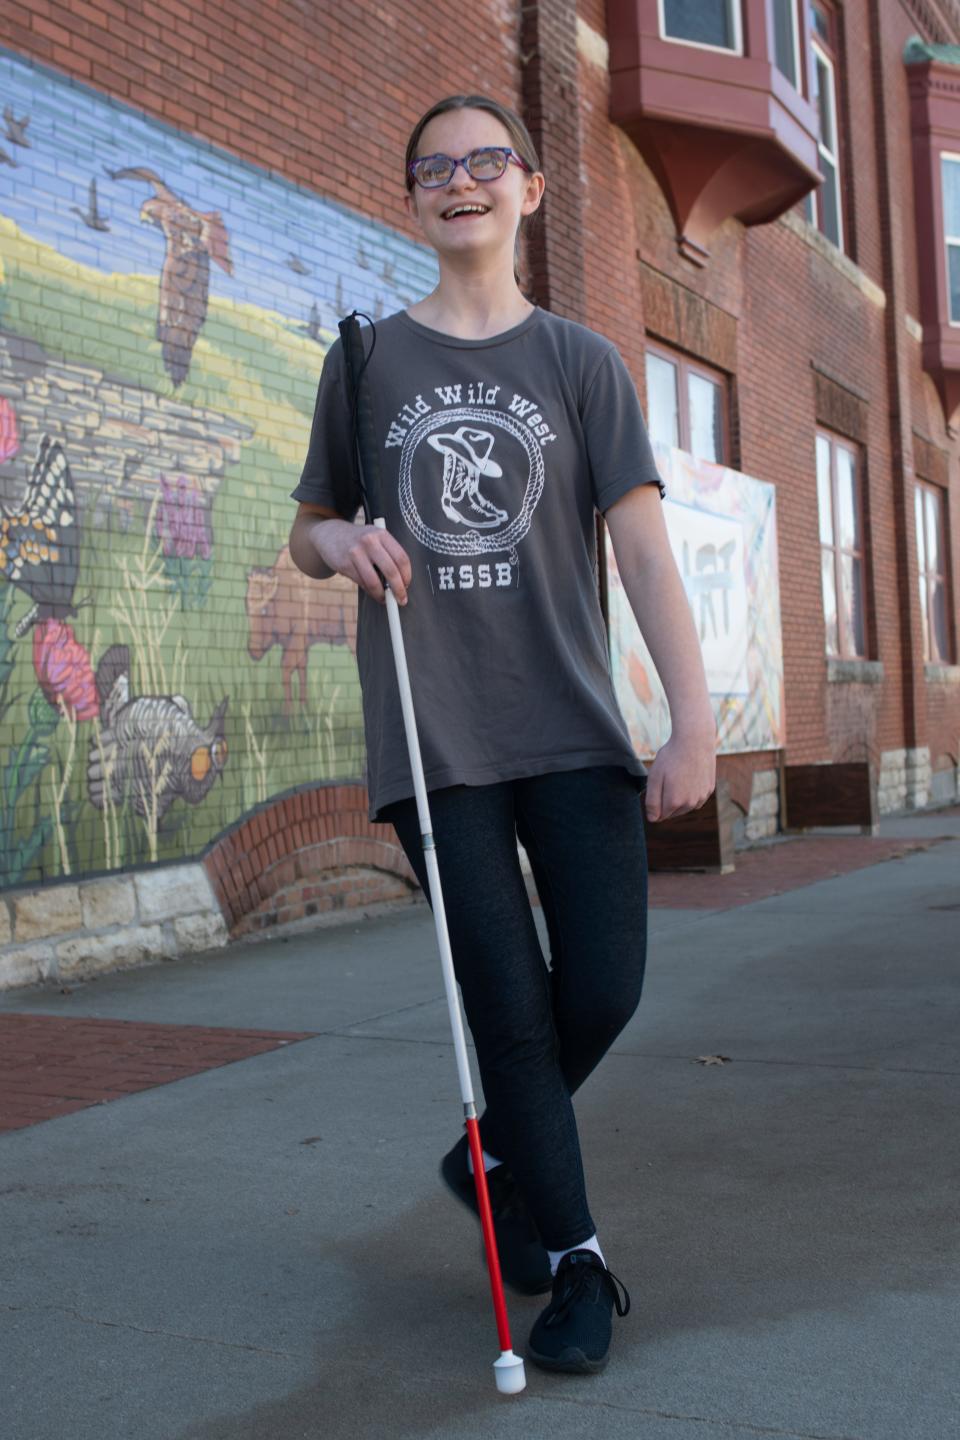 Holton Middle School student Addie Bartels doesn't have trouble getting around downtown Holton as she prepares to take on the competition this weekend for the Make48 competition at the Kansas State School for the Blind.